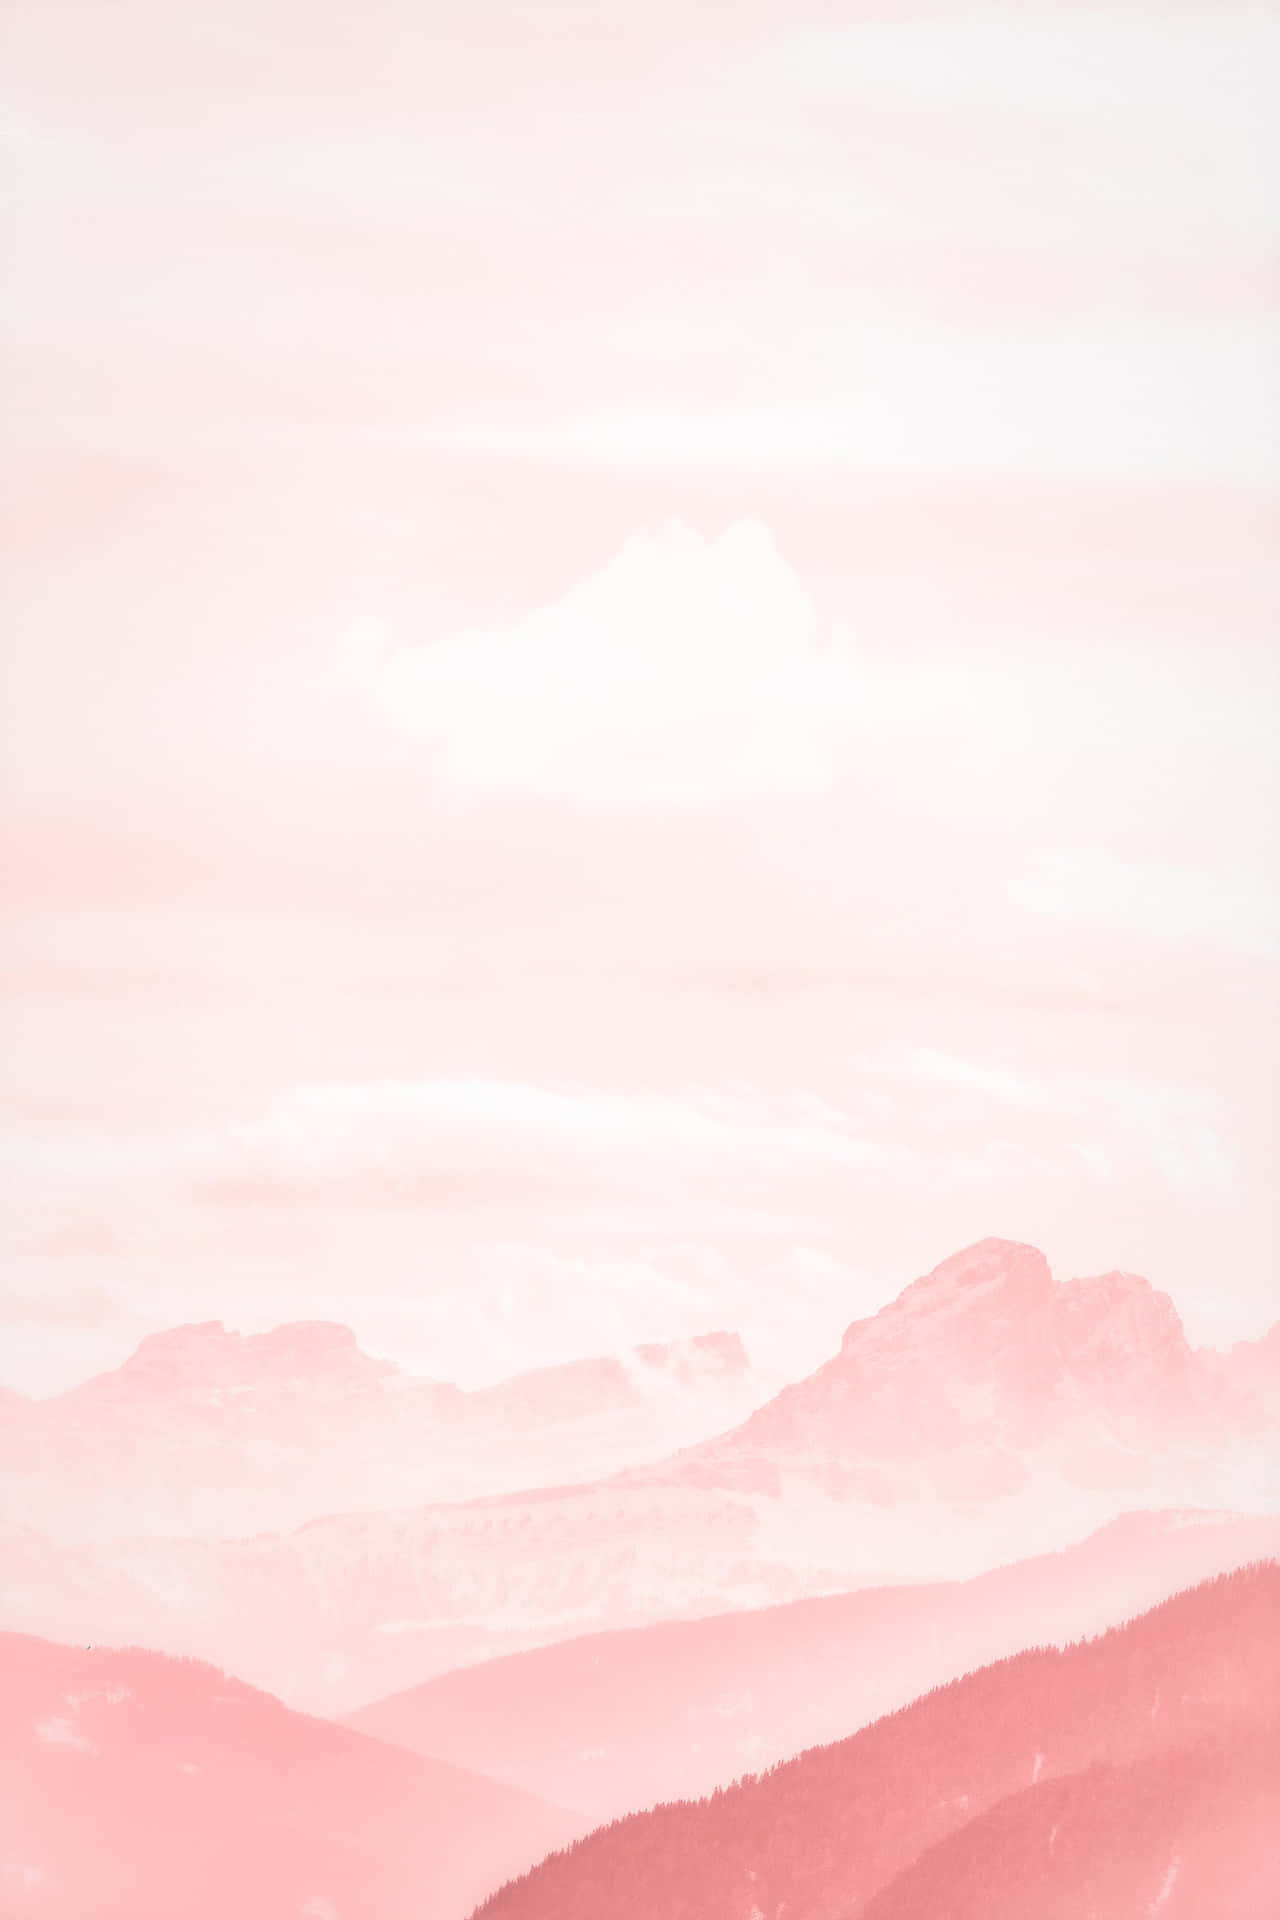 Pale Pink Background Mountains Sky